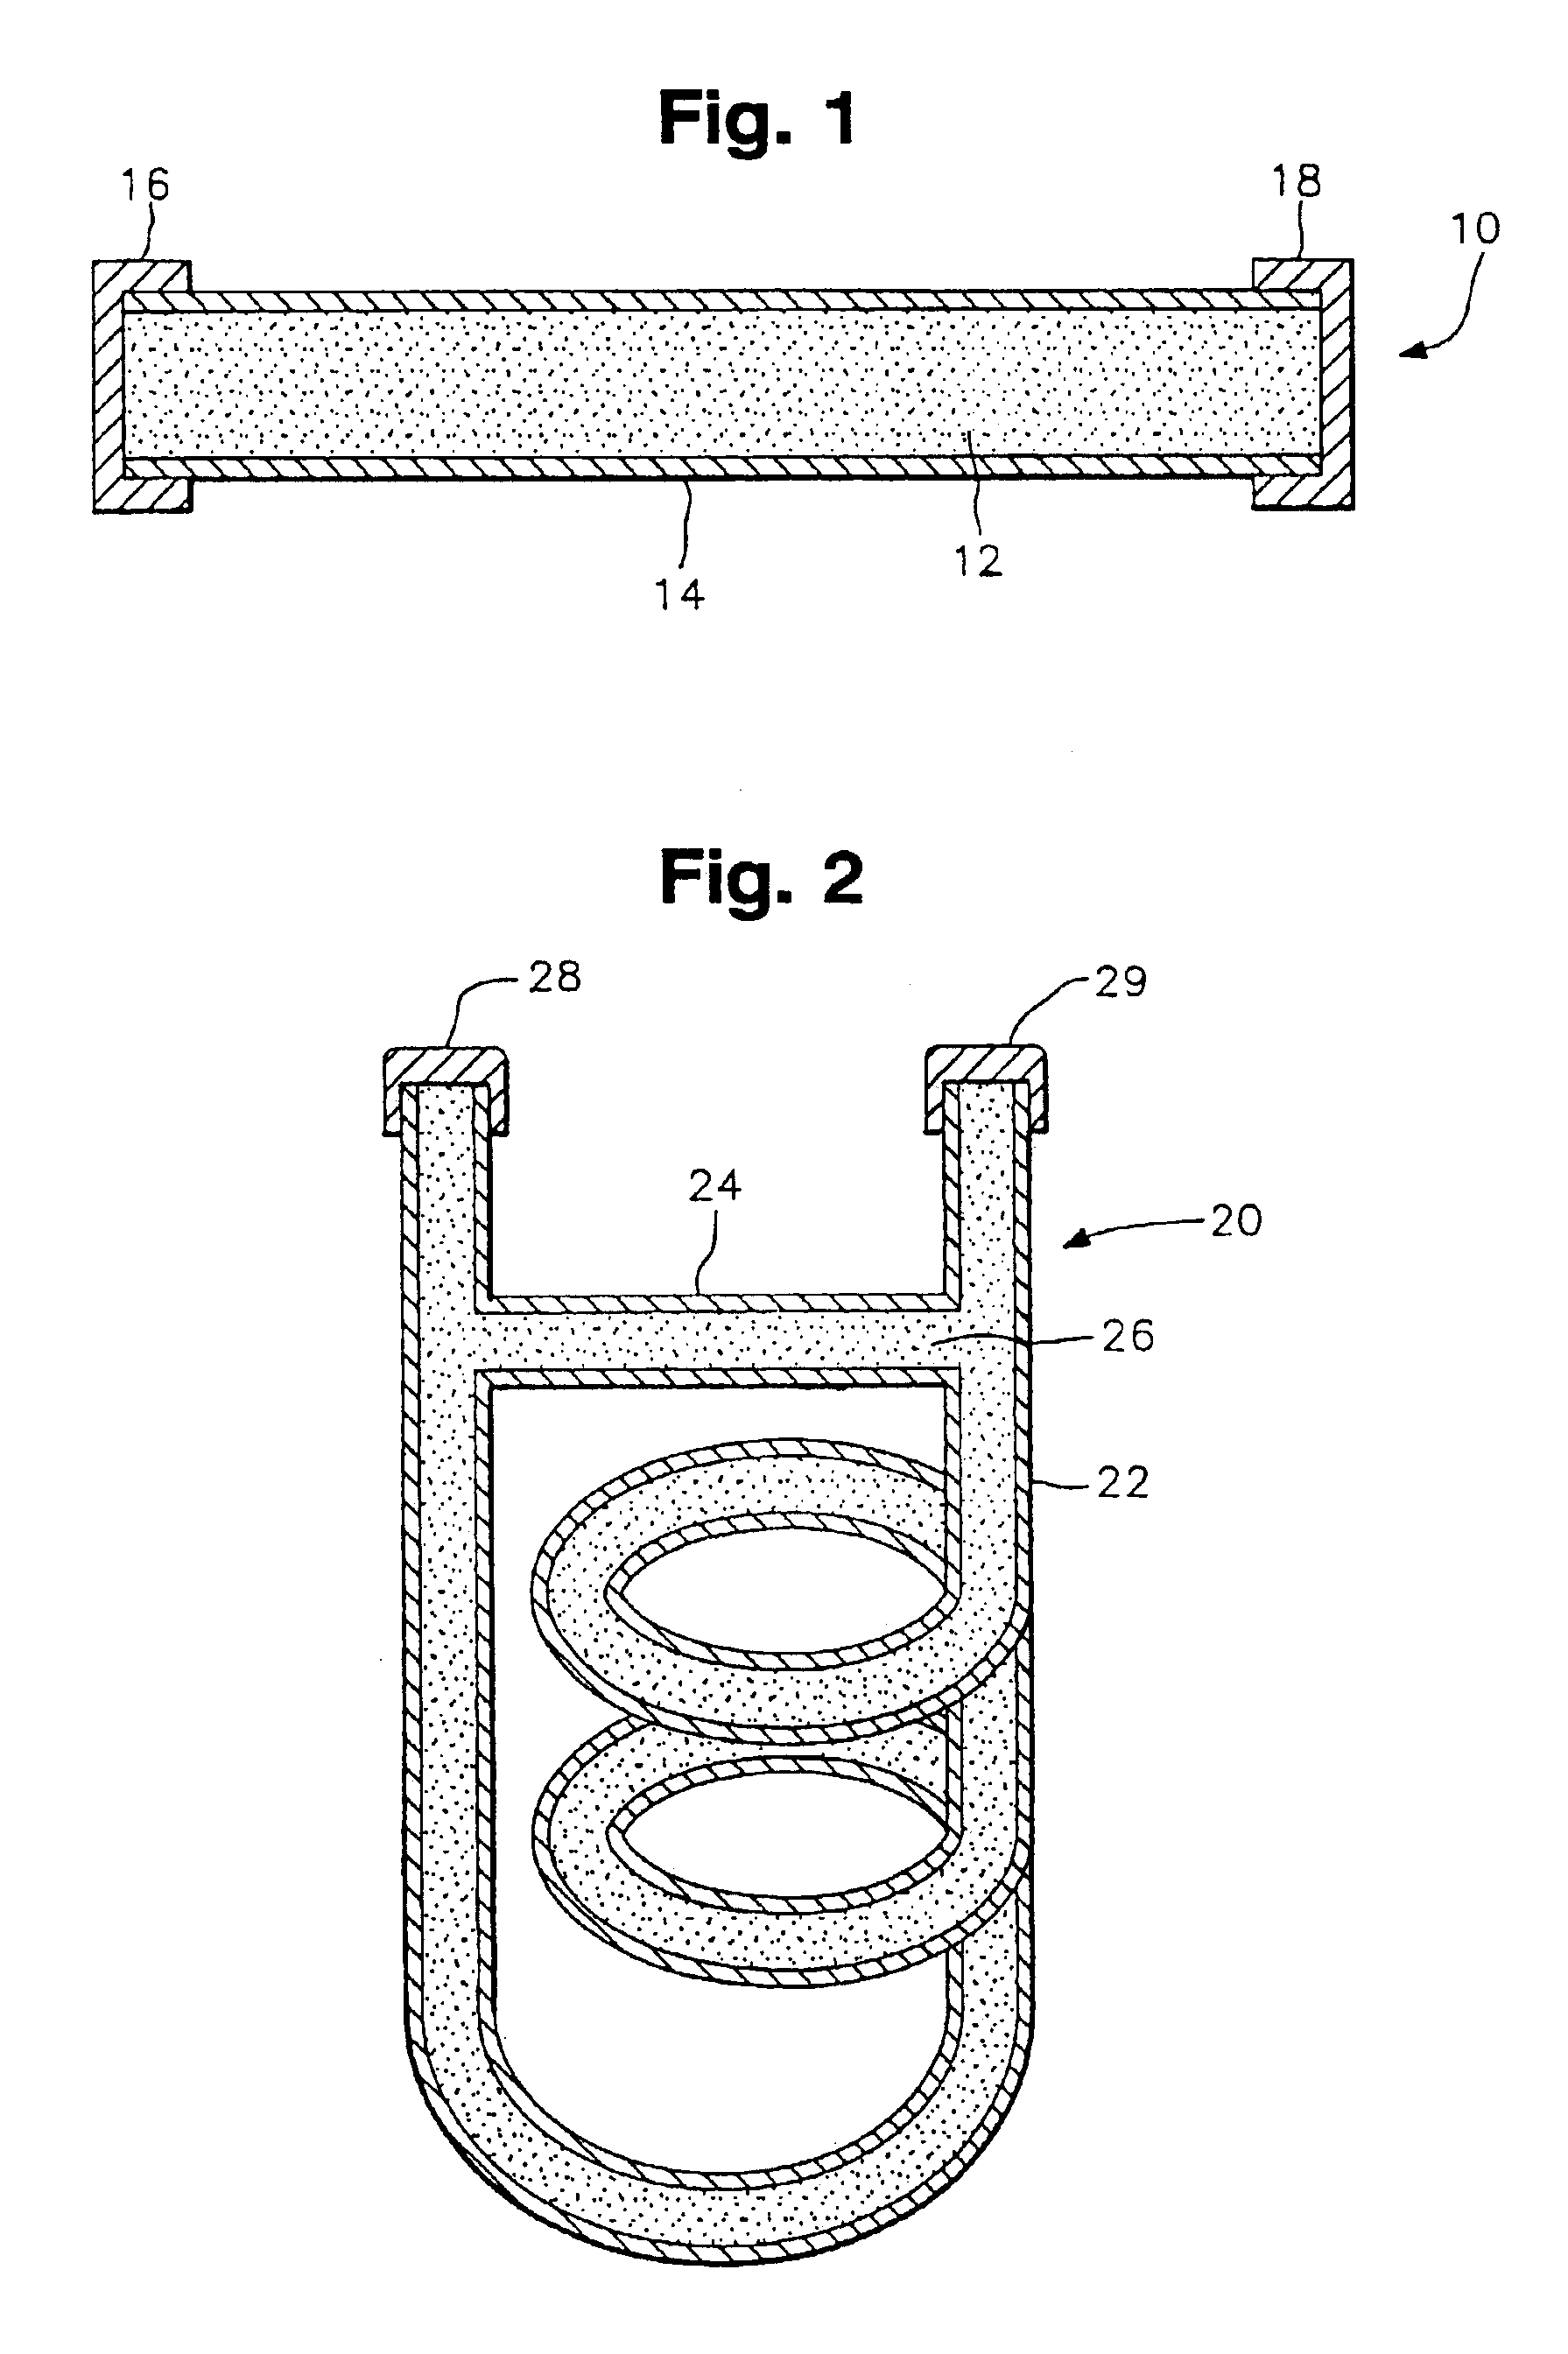 High-TC superconducting ceramic oxide products and macroscopic and microscopic methods of making the same